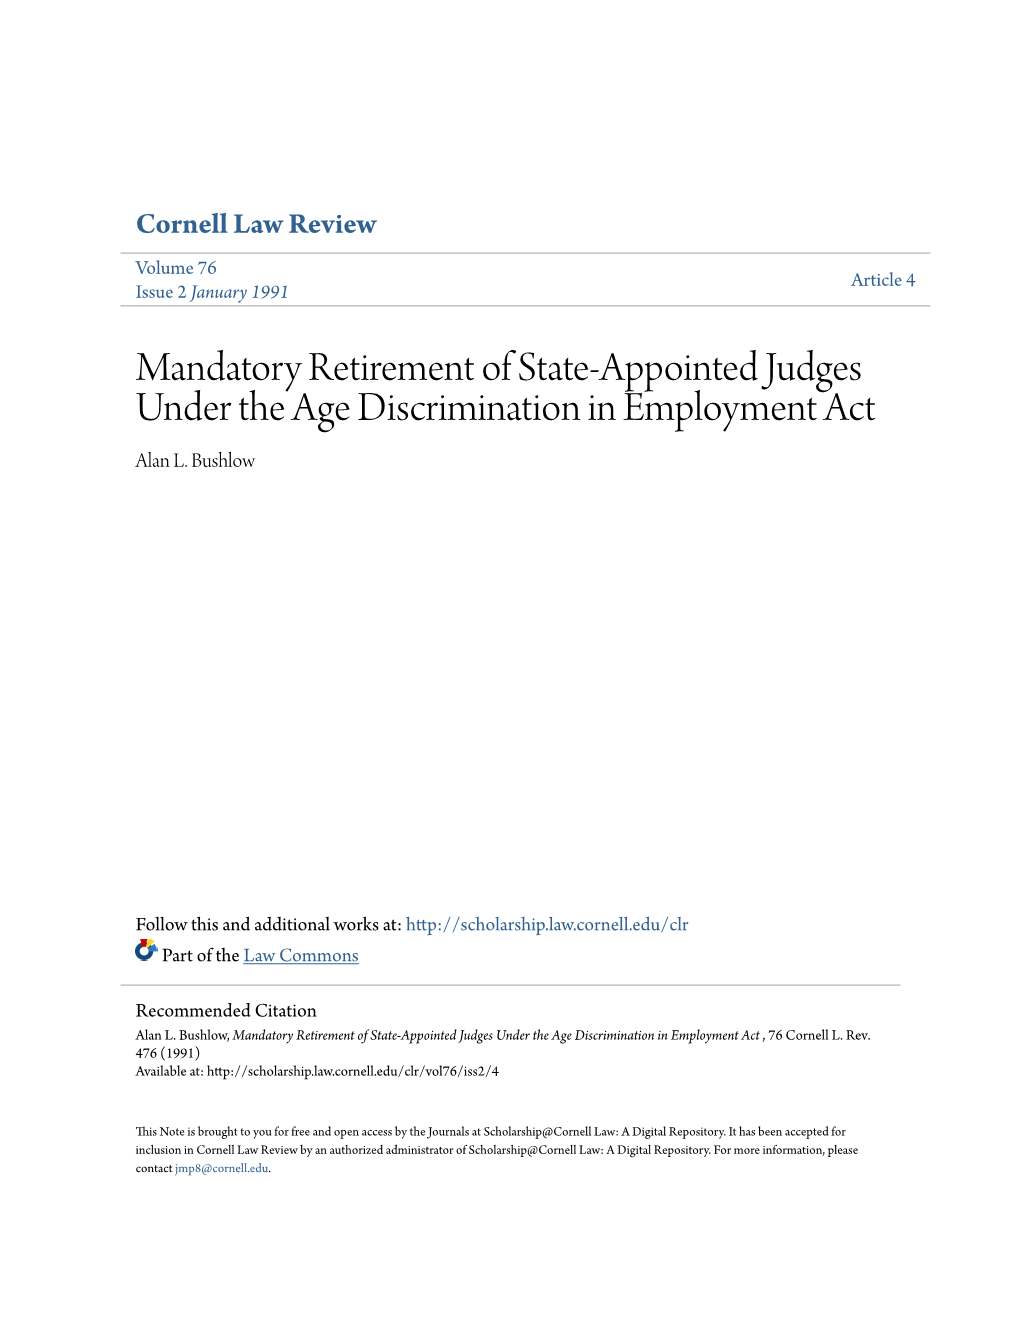 Mandatory Retirement of State-Appointed Judges Under the Age Discrimination in Employment Act Alan L